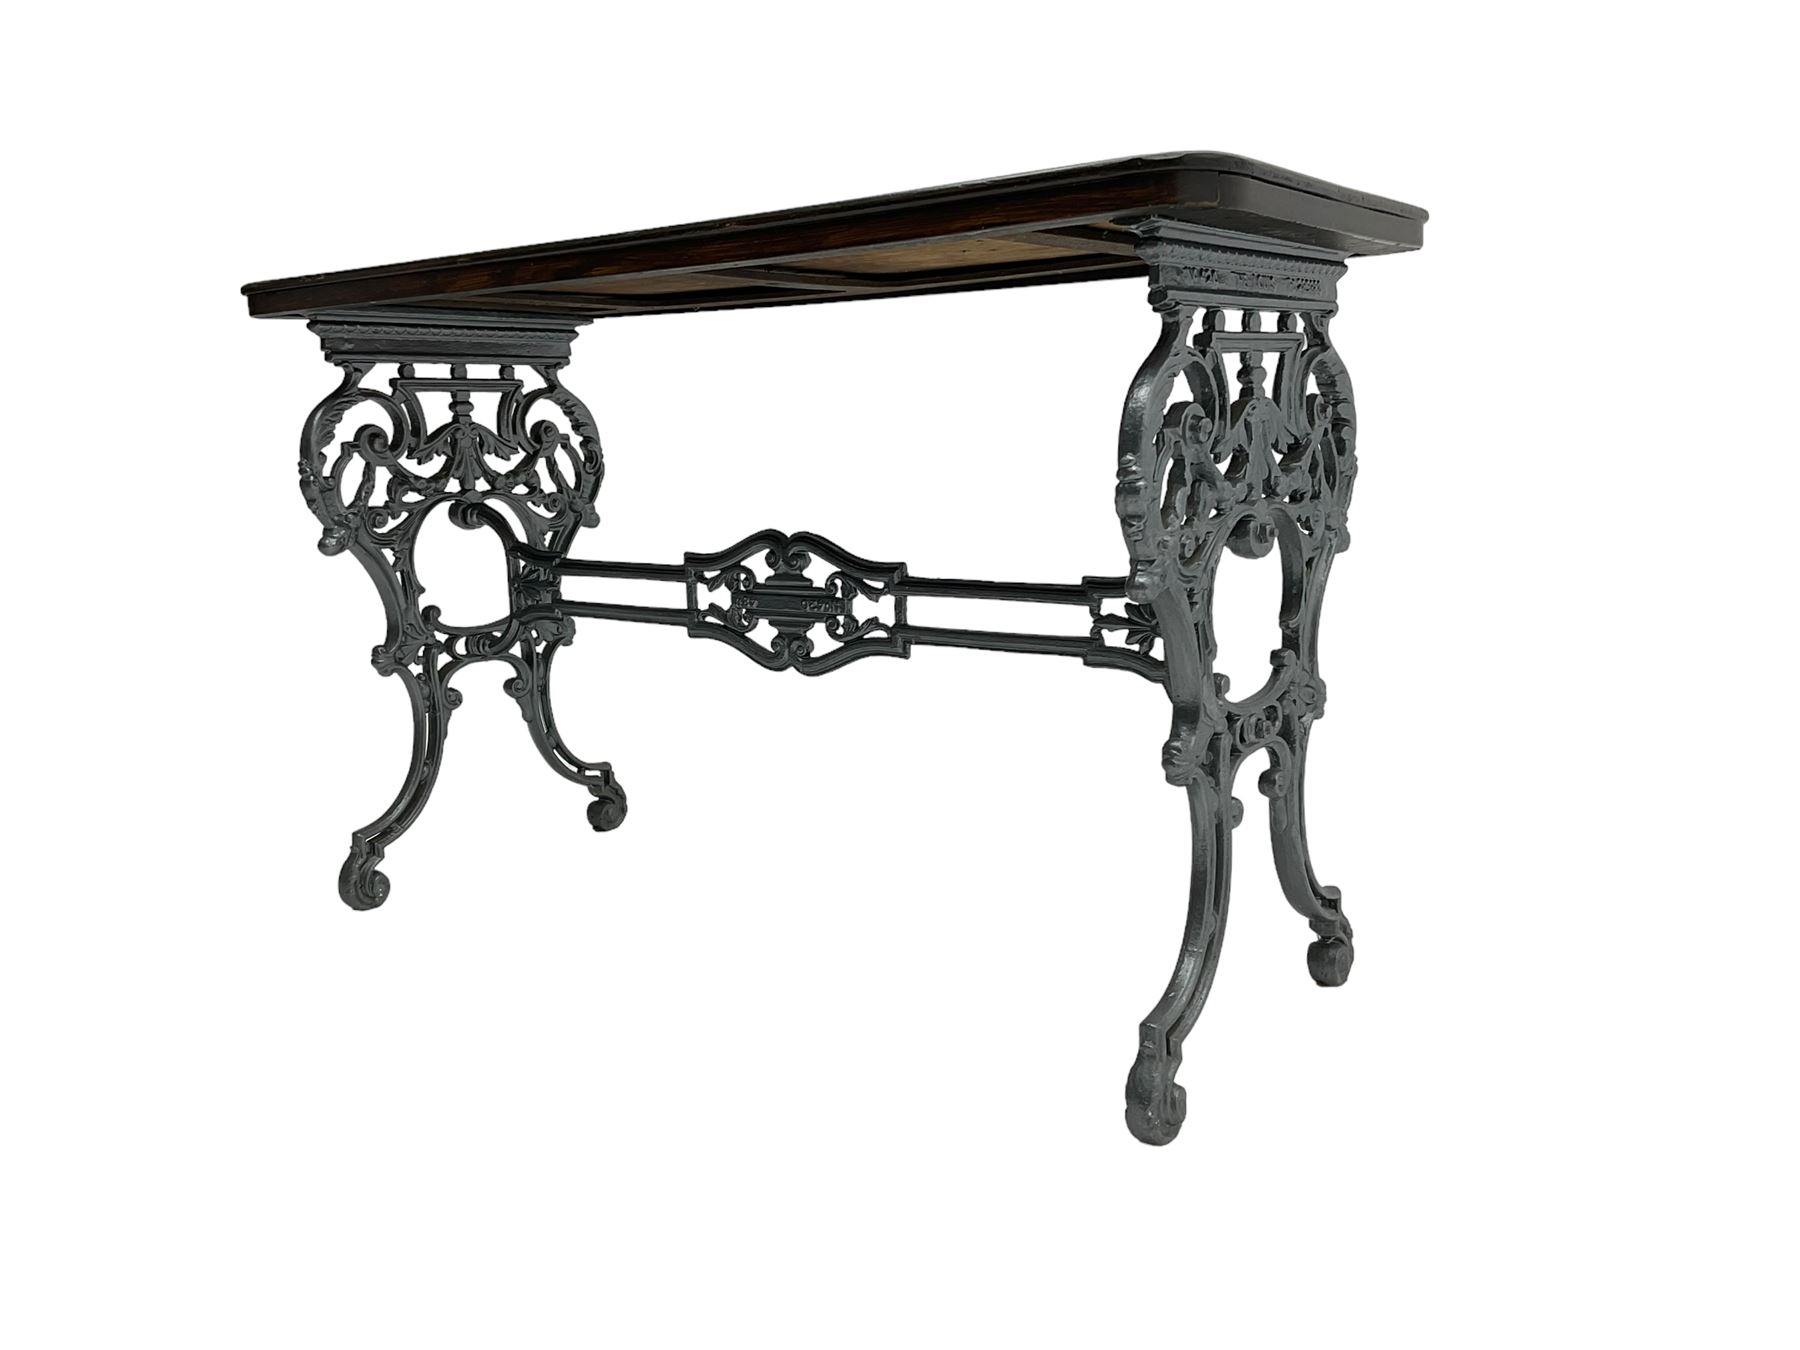 The Louis - late 19th century French design cast iron table